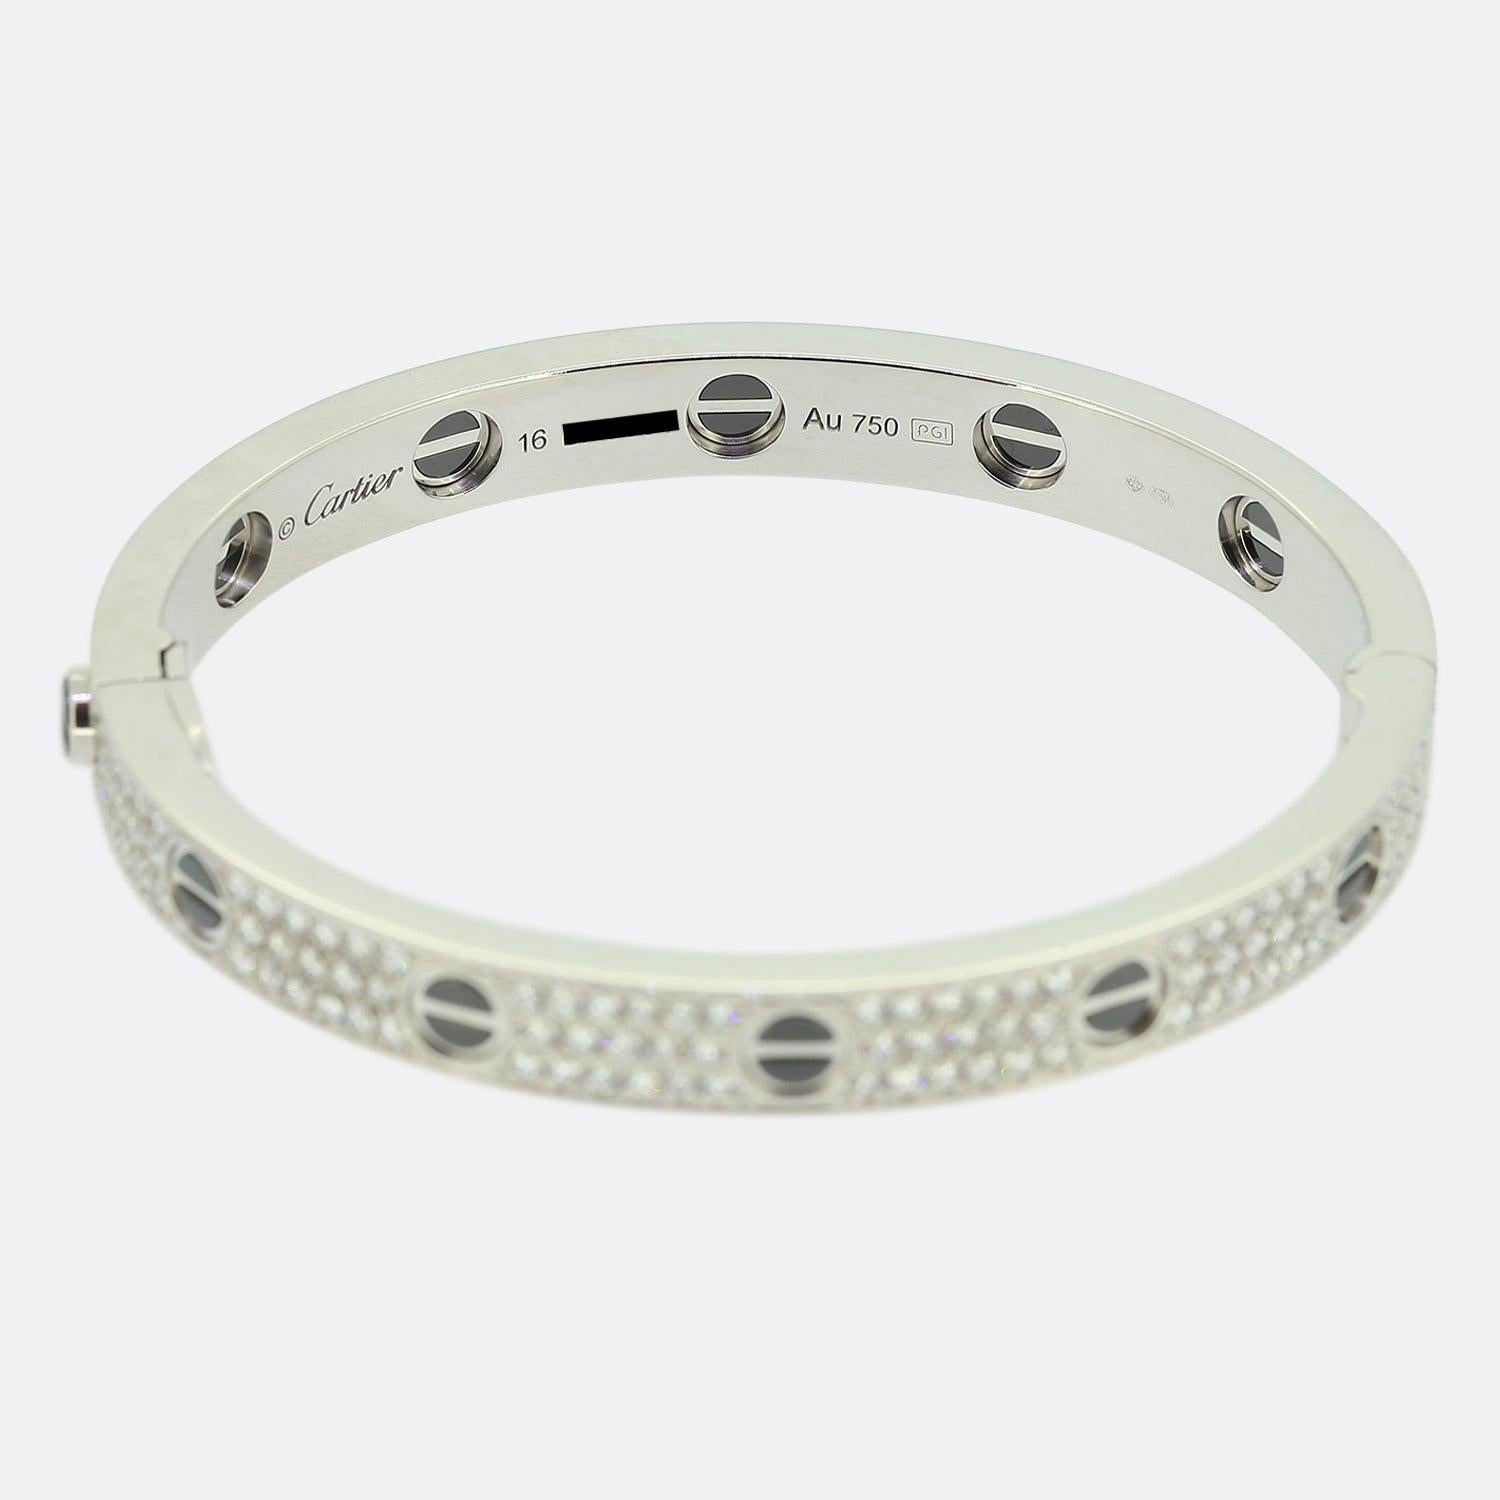 Here we have an 18ct white gold diamond bangle from the world renowned luxury jewellery house of Cartier. This bangle forms part of the LOVE collection and features black ceramic set to the iconic screw motifs around the outer edge with 204 round